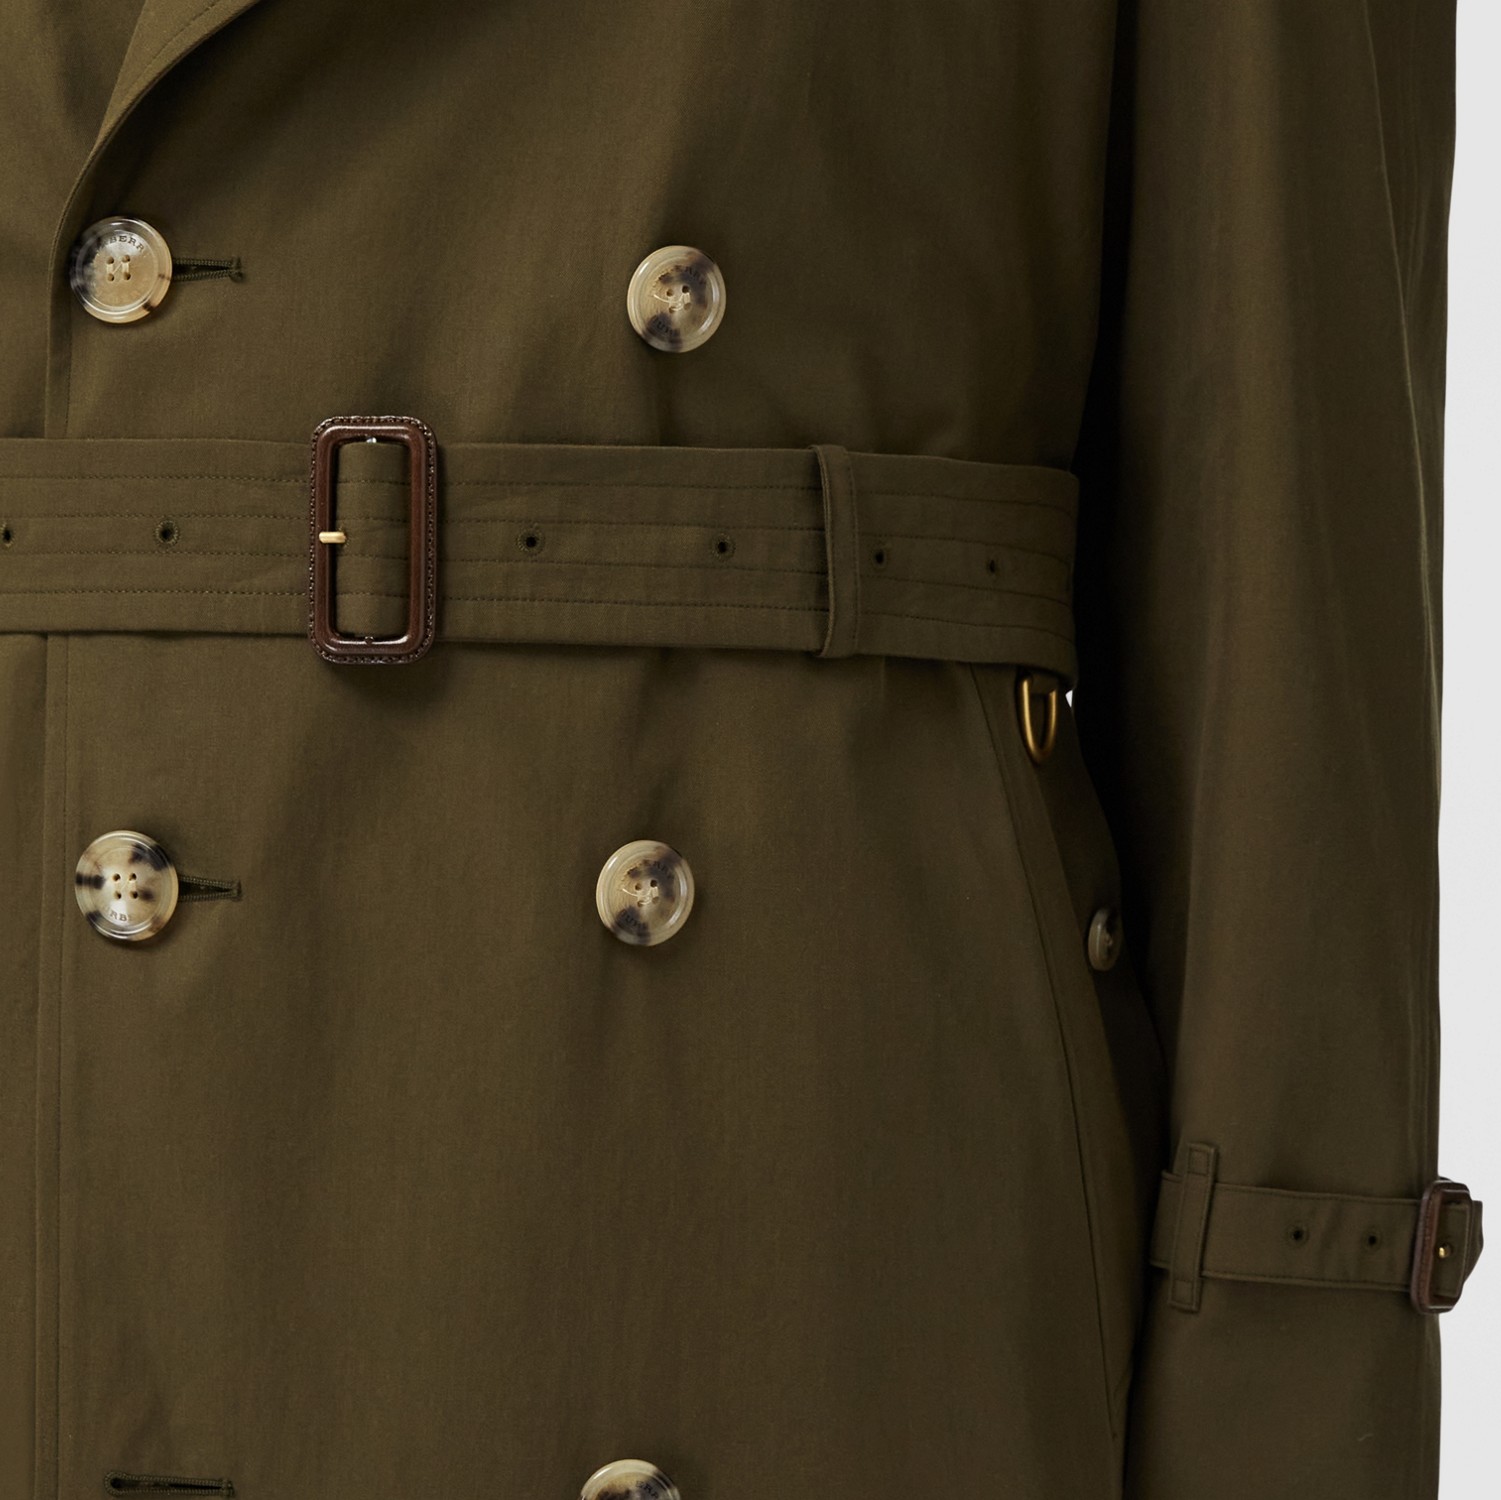 Trench coat Heritage Westminster (Caqui Militar Oscuro) - Hombre | Burberry® oficial